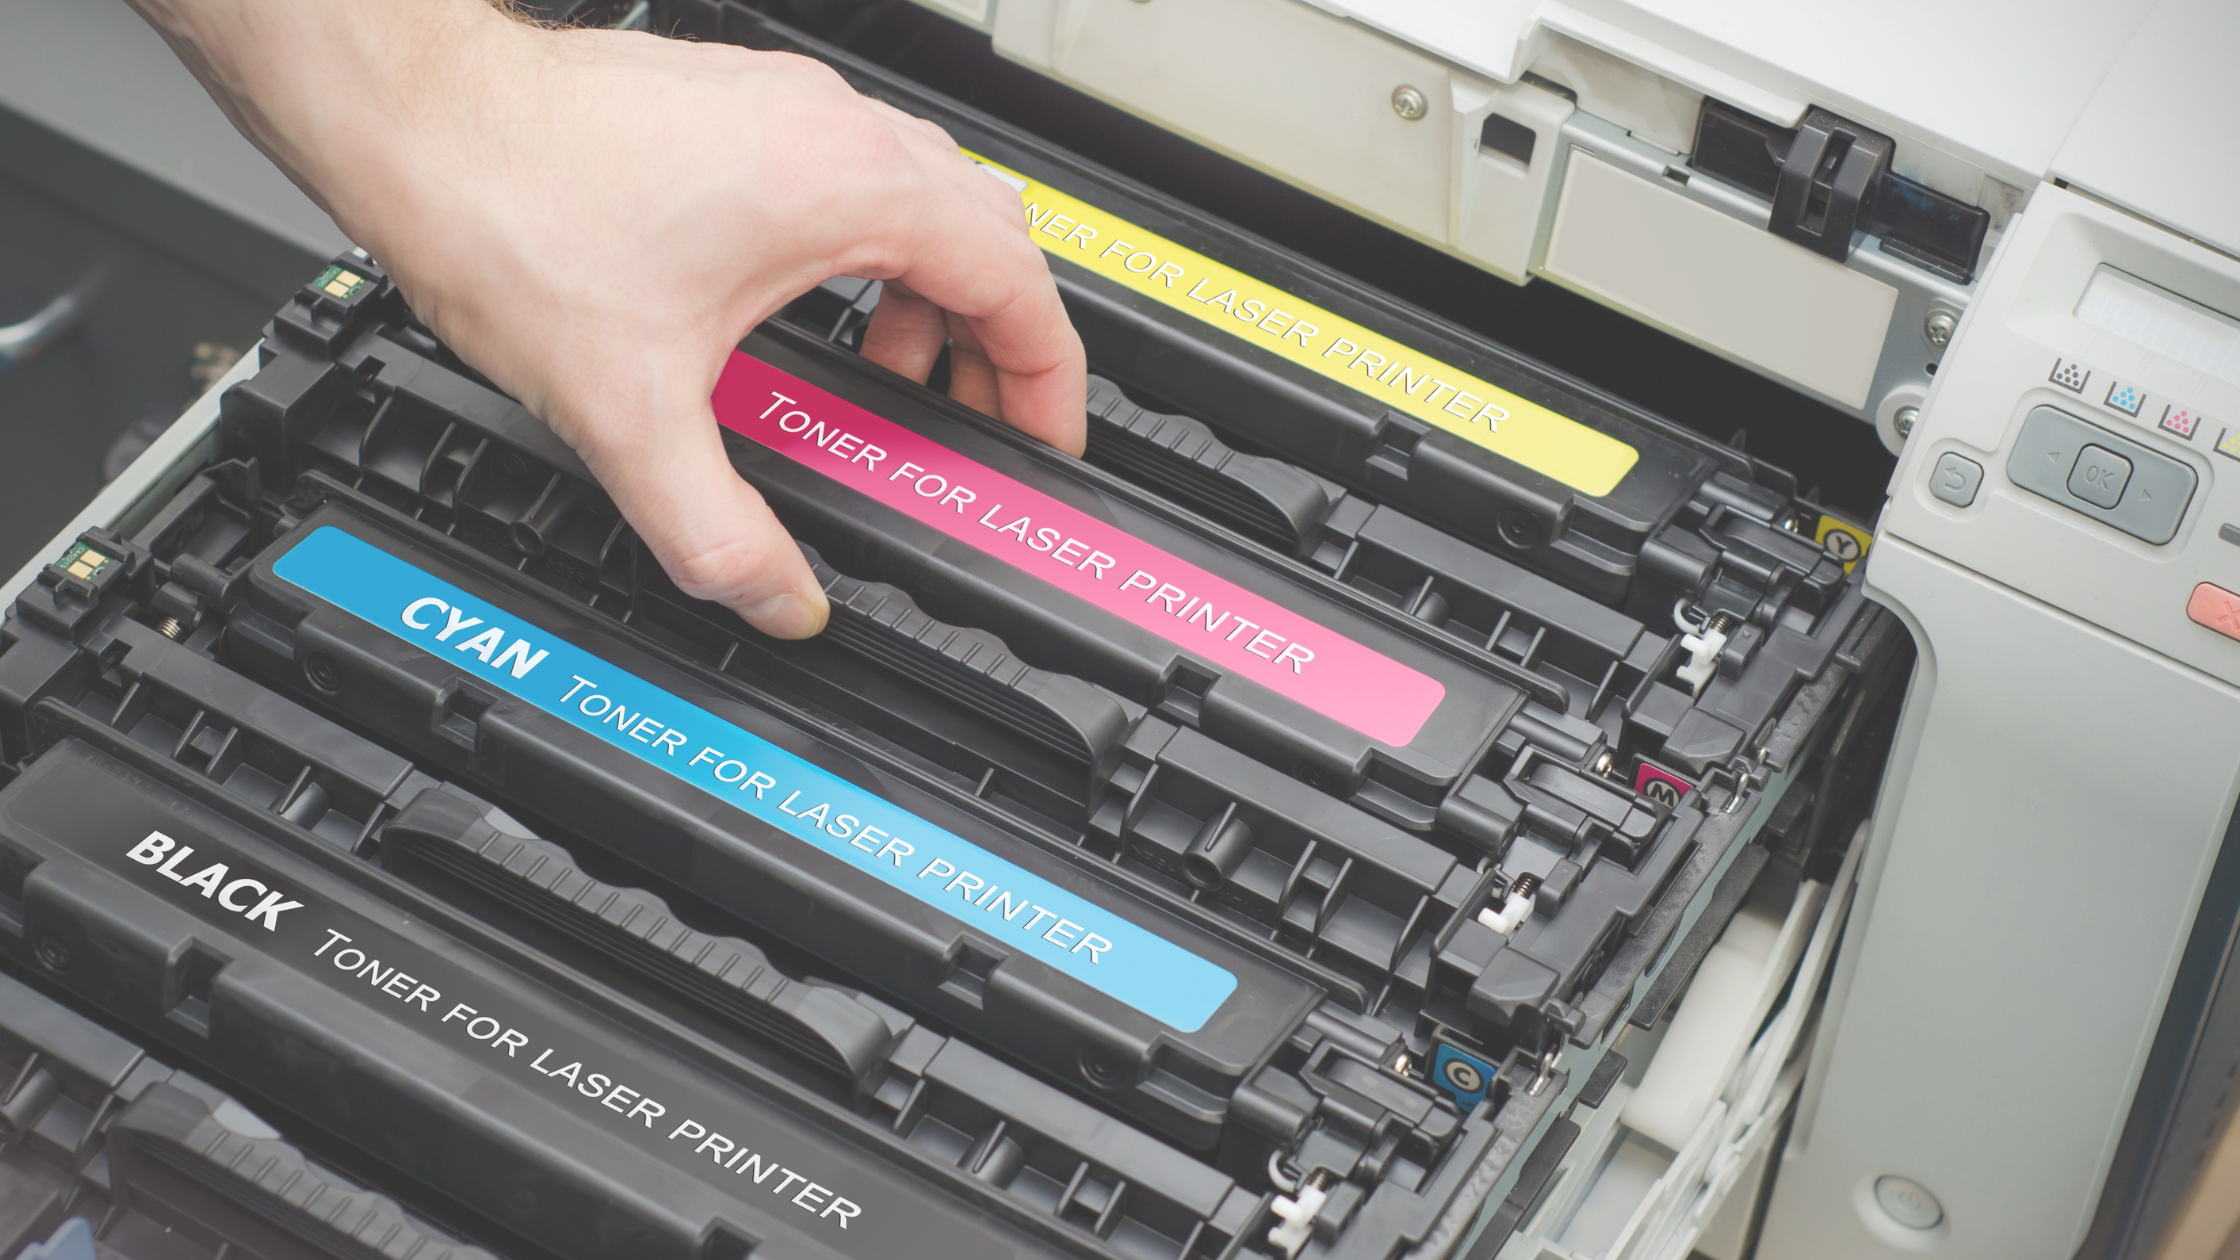 Close-up of a person's hand replacing toner cartridges in a laser printer. There are four cartridges visible labeled with their respective colors: black, cyan, magenta, and yellow. The printer is open, showing the internal cartridge housing, indicating routine maintenance or replacement of printing supplies.